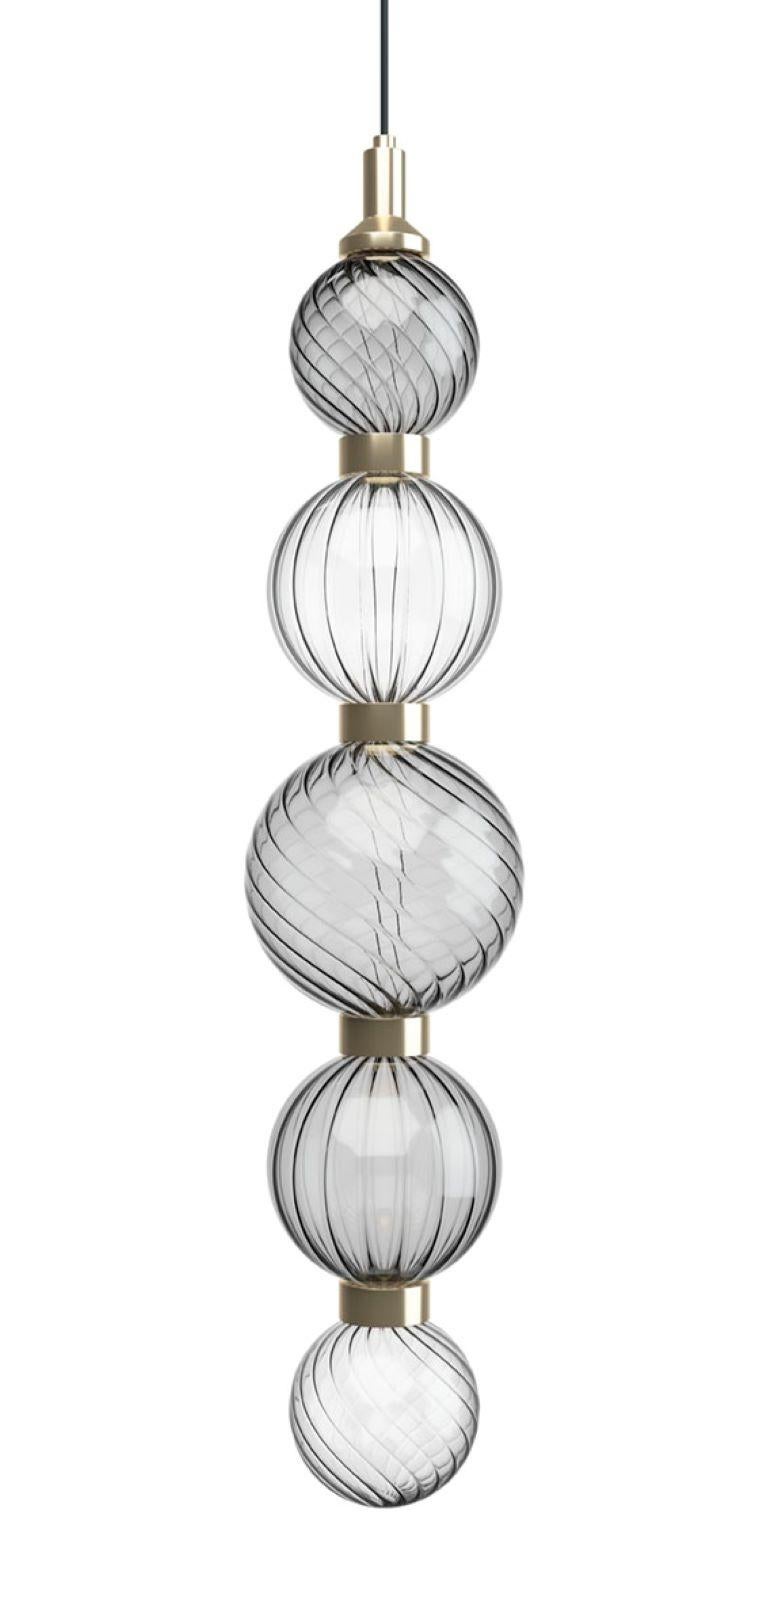 Italian Ceiling Lamp Metal Frame Spheres Pyrex Glass in Different Color Led Lighting For Sale